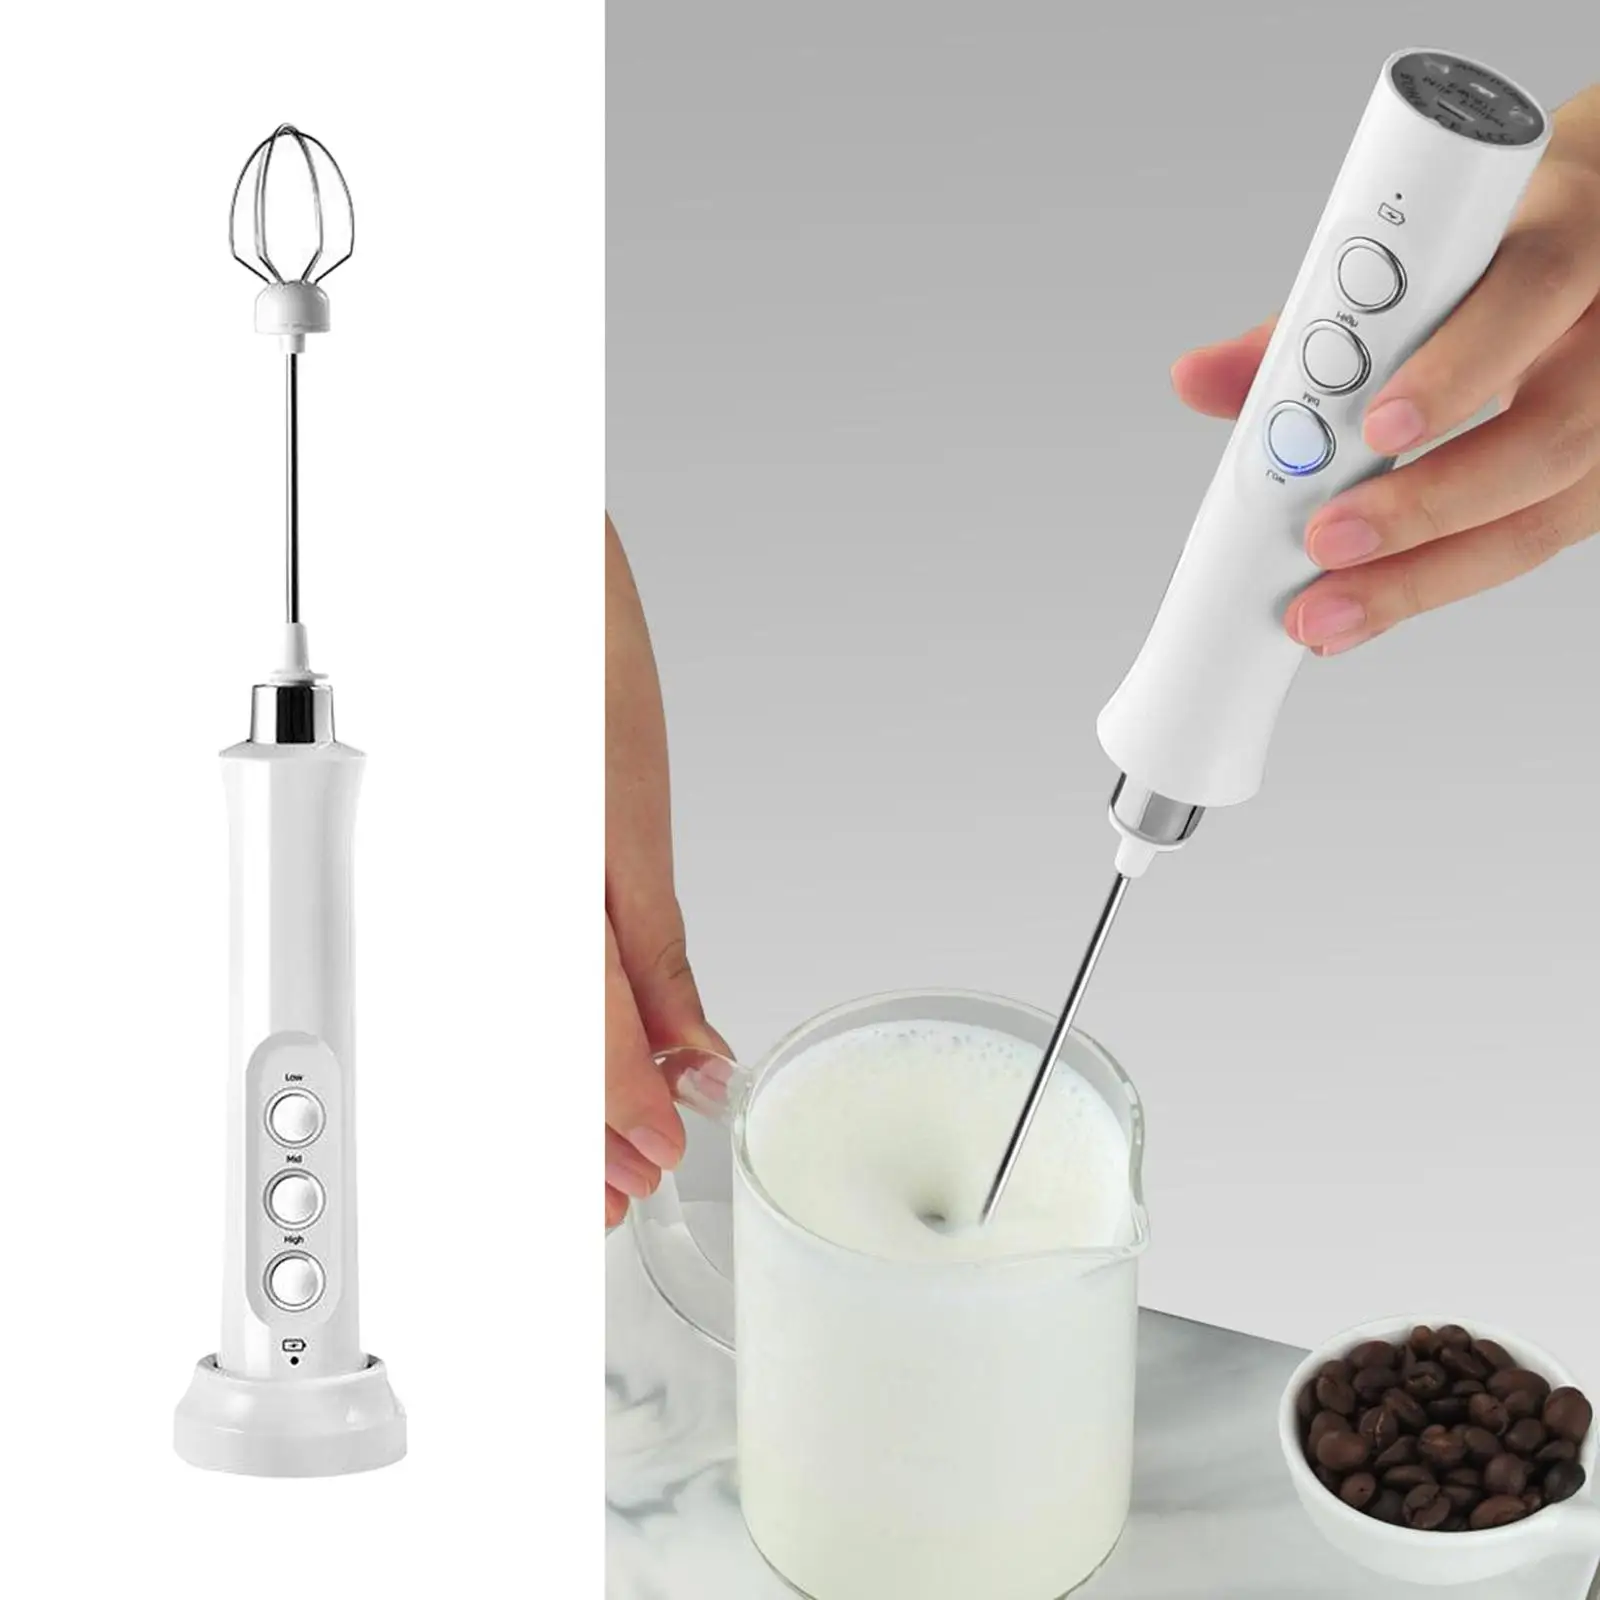 Electric Milk Frother 3 Speeds Cappuccino Coffee Foamer 3 Whisk Handheld Egg Beater Hot Chocolate Latte Drink Mixer Blender